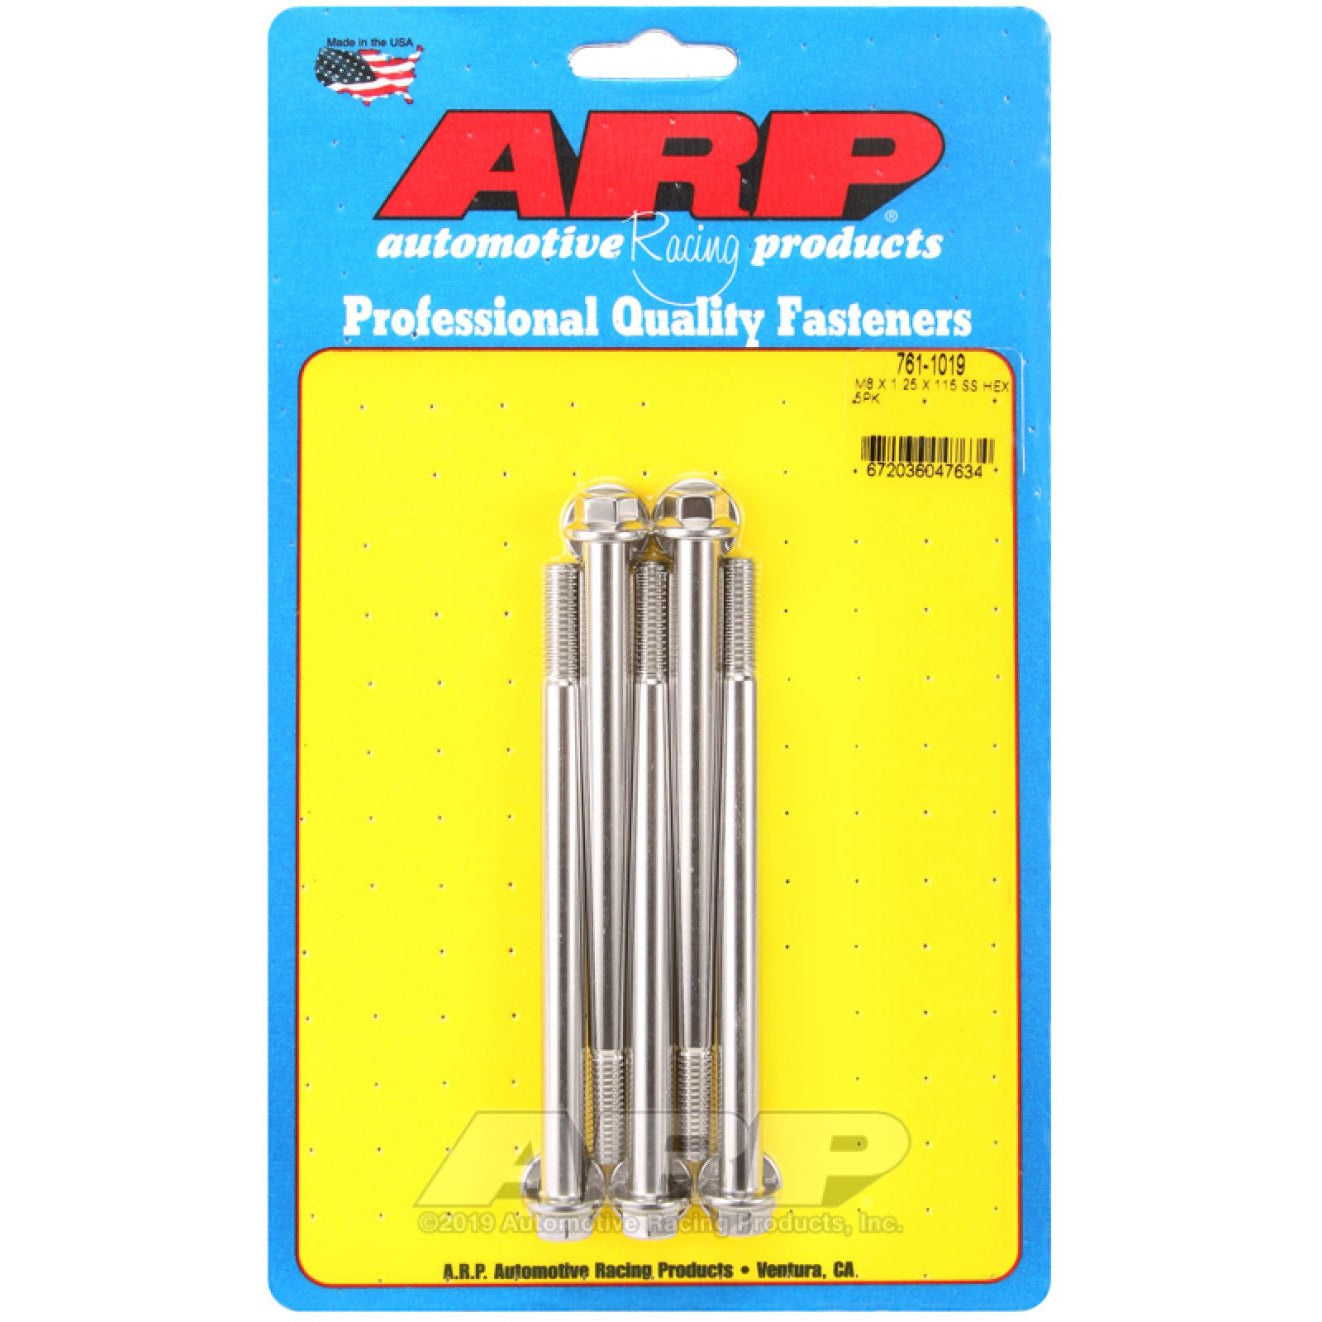 ARP M8 x 1.25 x 115 Hex SS Bolts (5/pkg) ARP Hardware Kits - Other